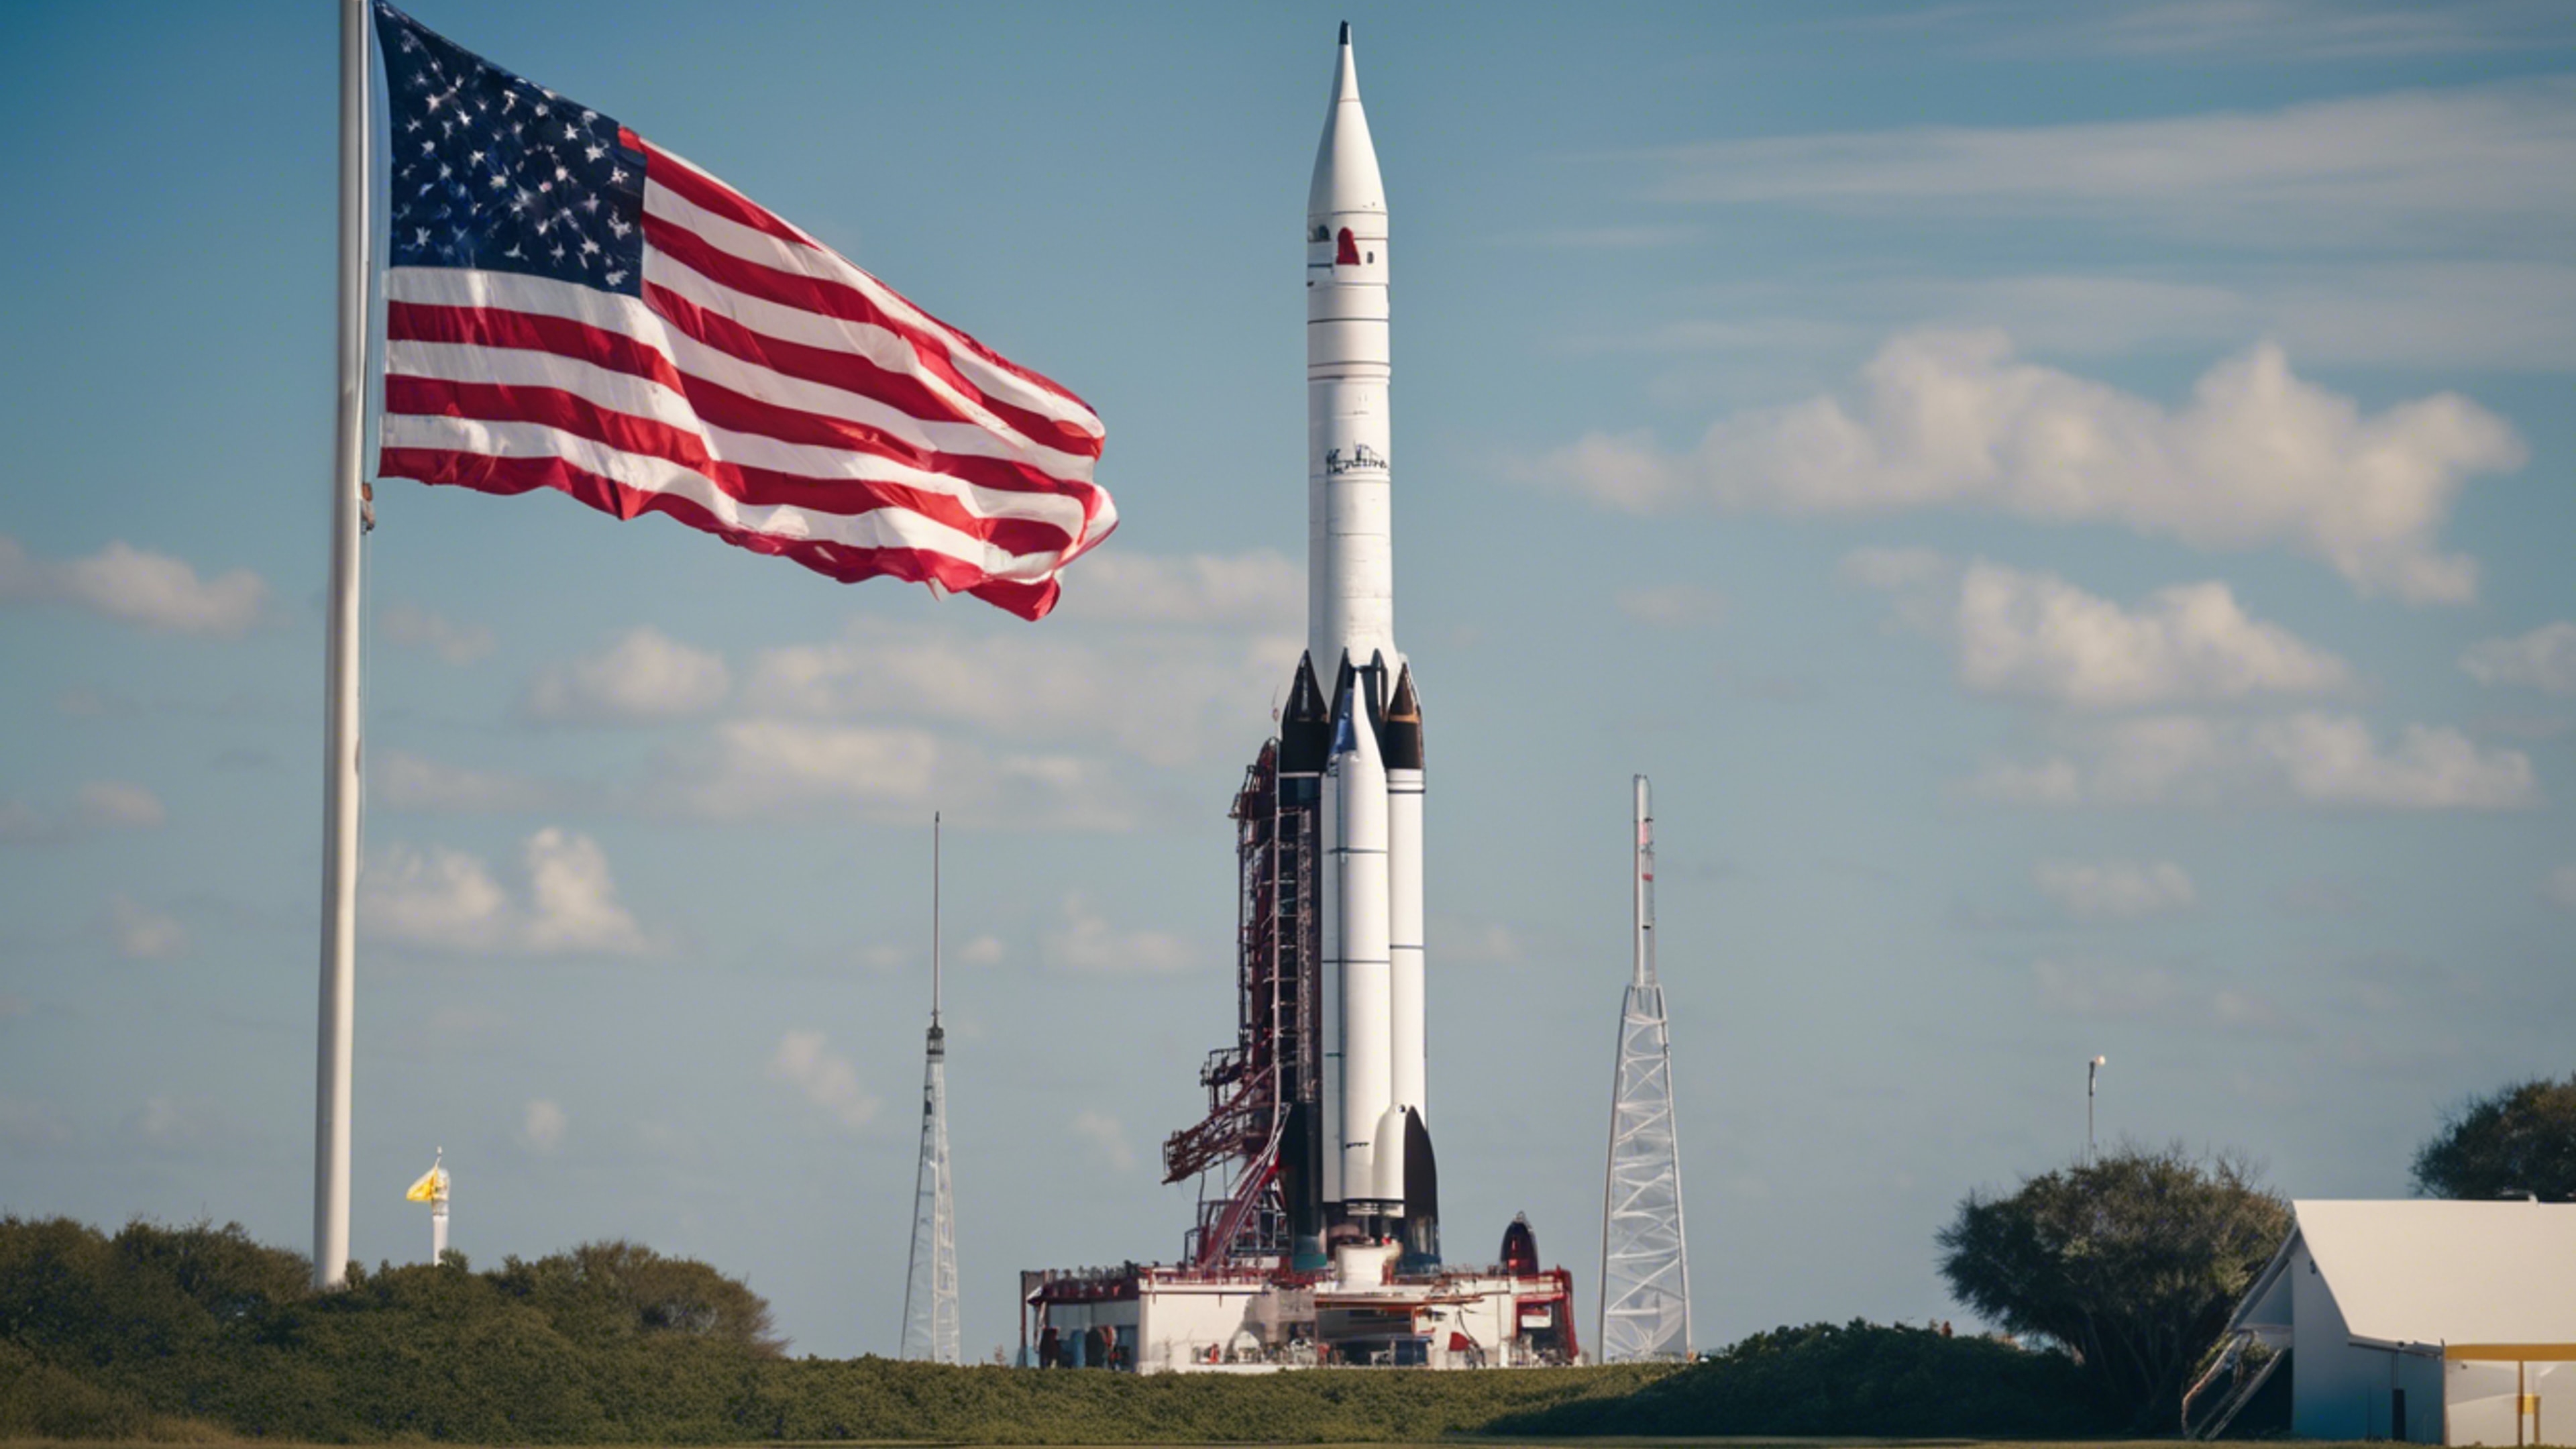 A historic rocket display at Cape Canaveral, with a clear blue sky and the American flag waving in the background. 牆紙[7e3199d5ab33424fb953]